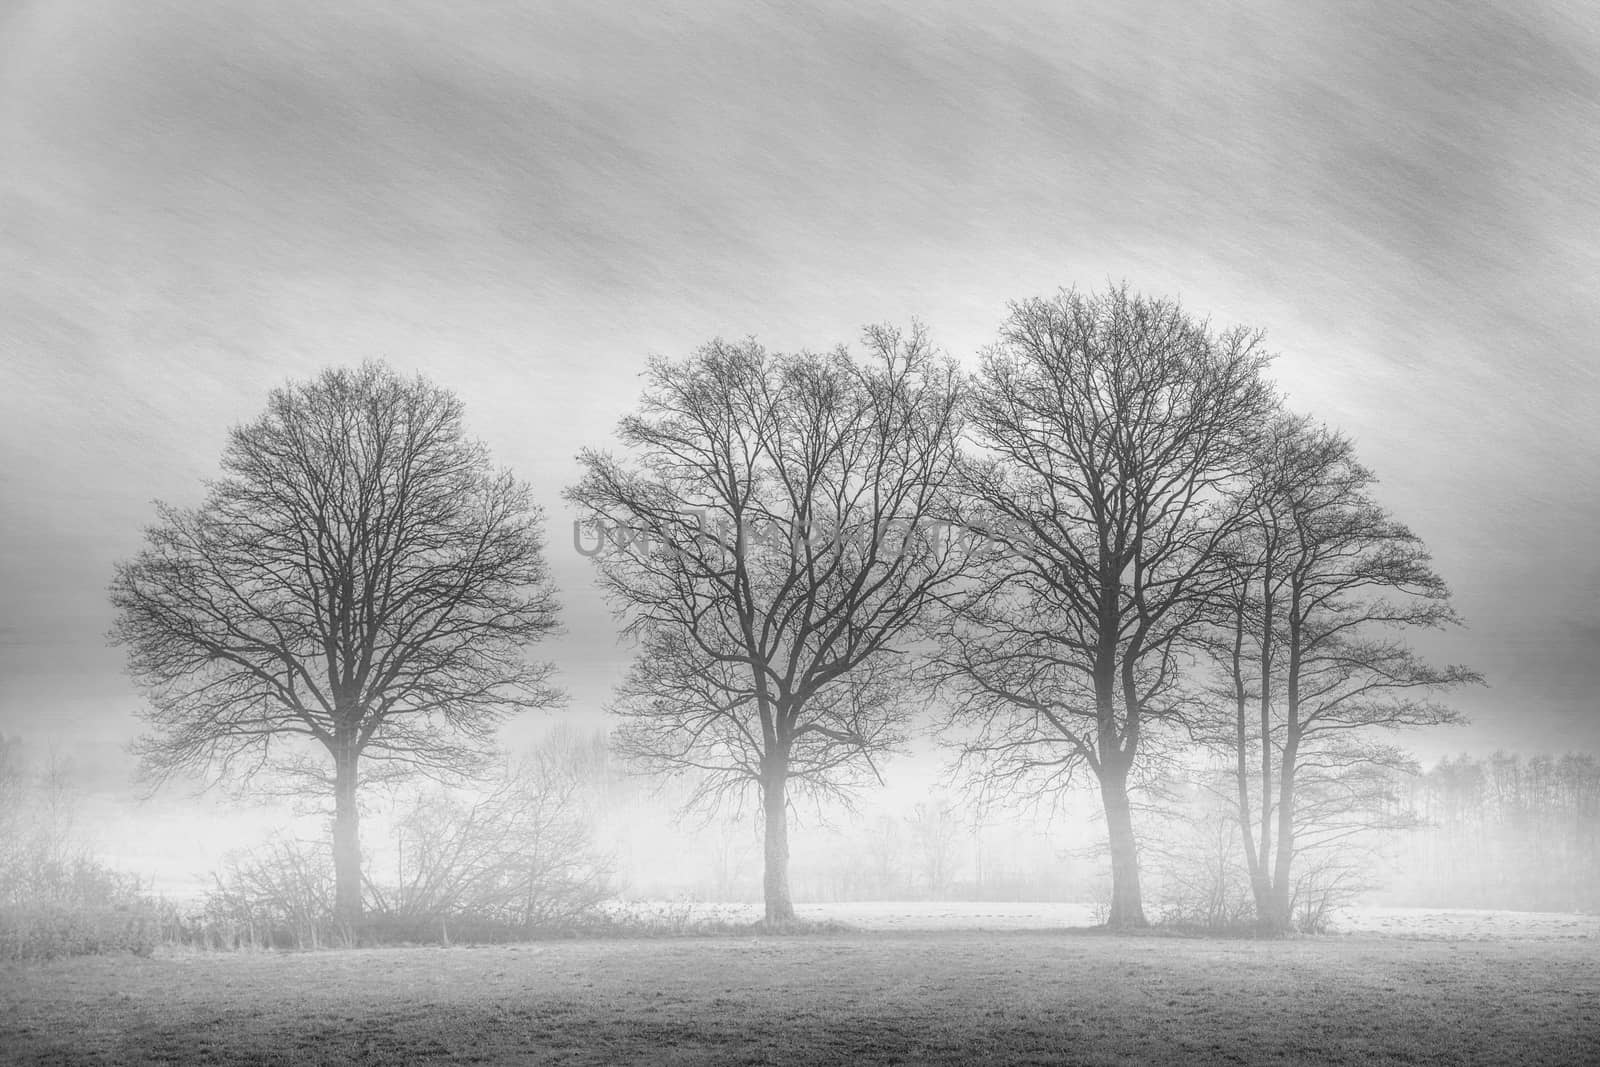 A group of trees with picturesque effect black and white by sandra_fotodesign